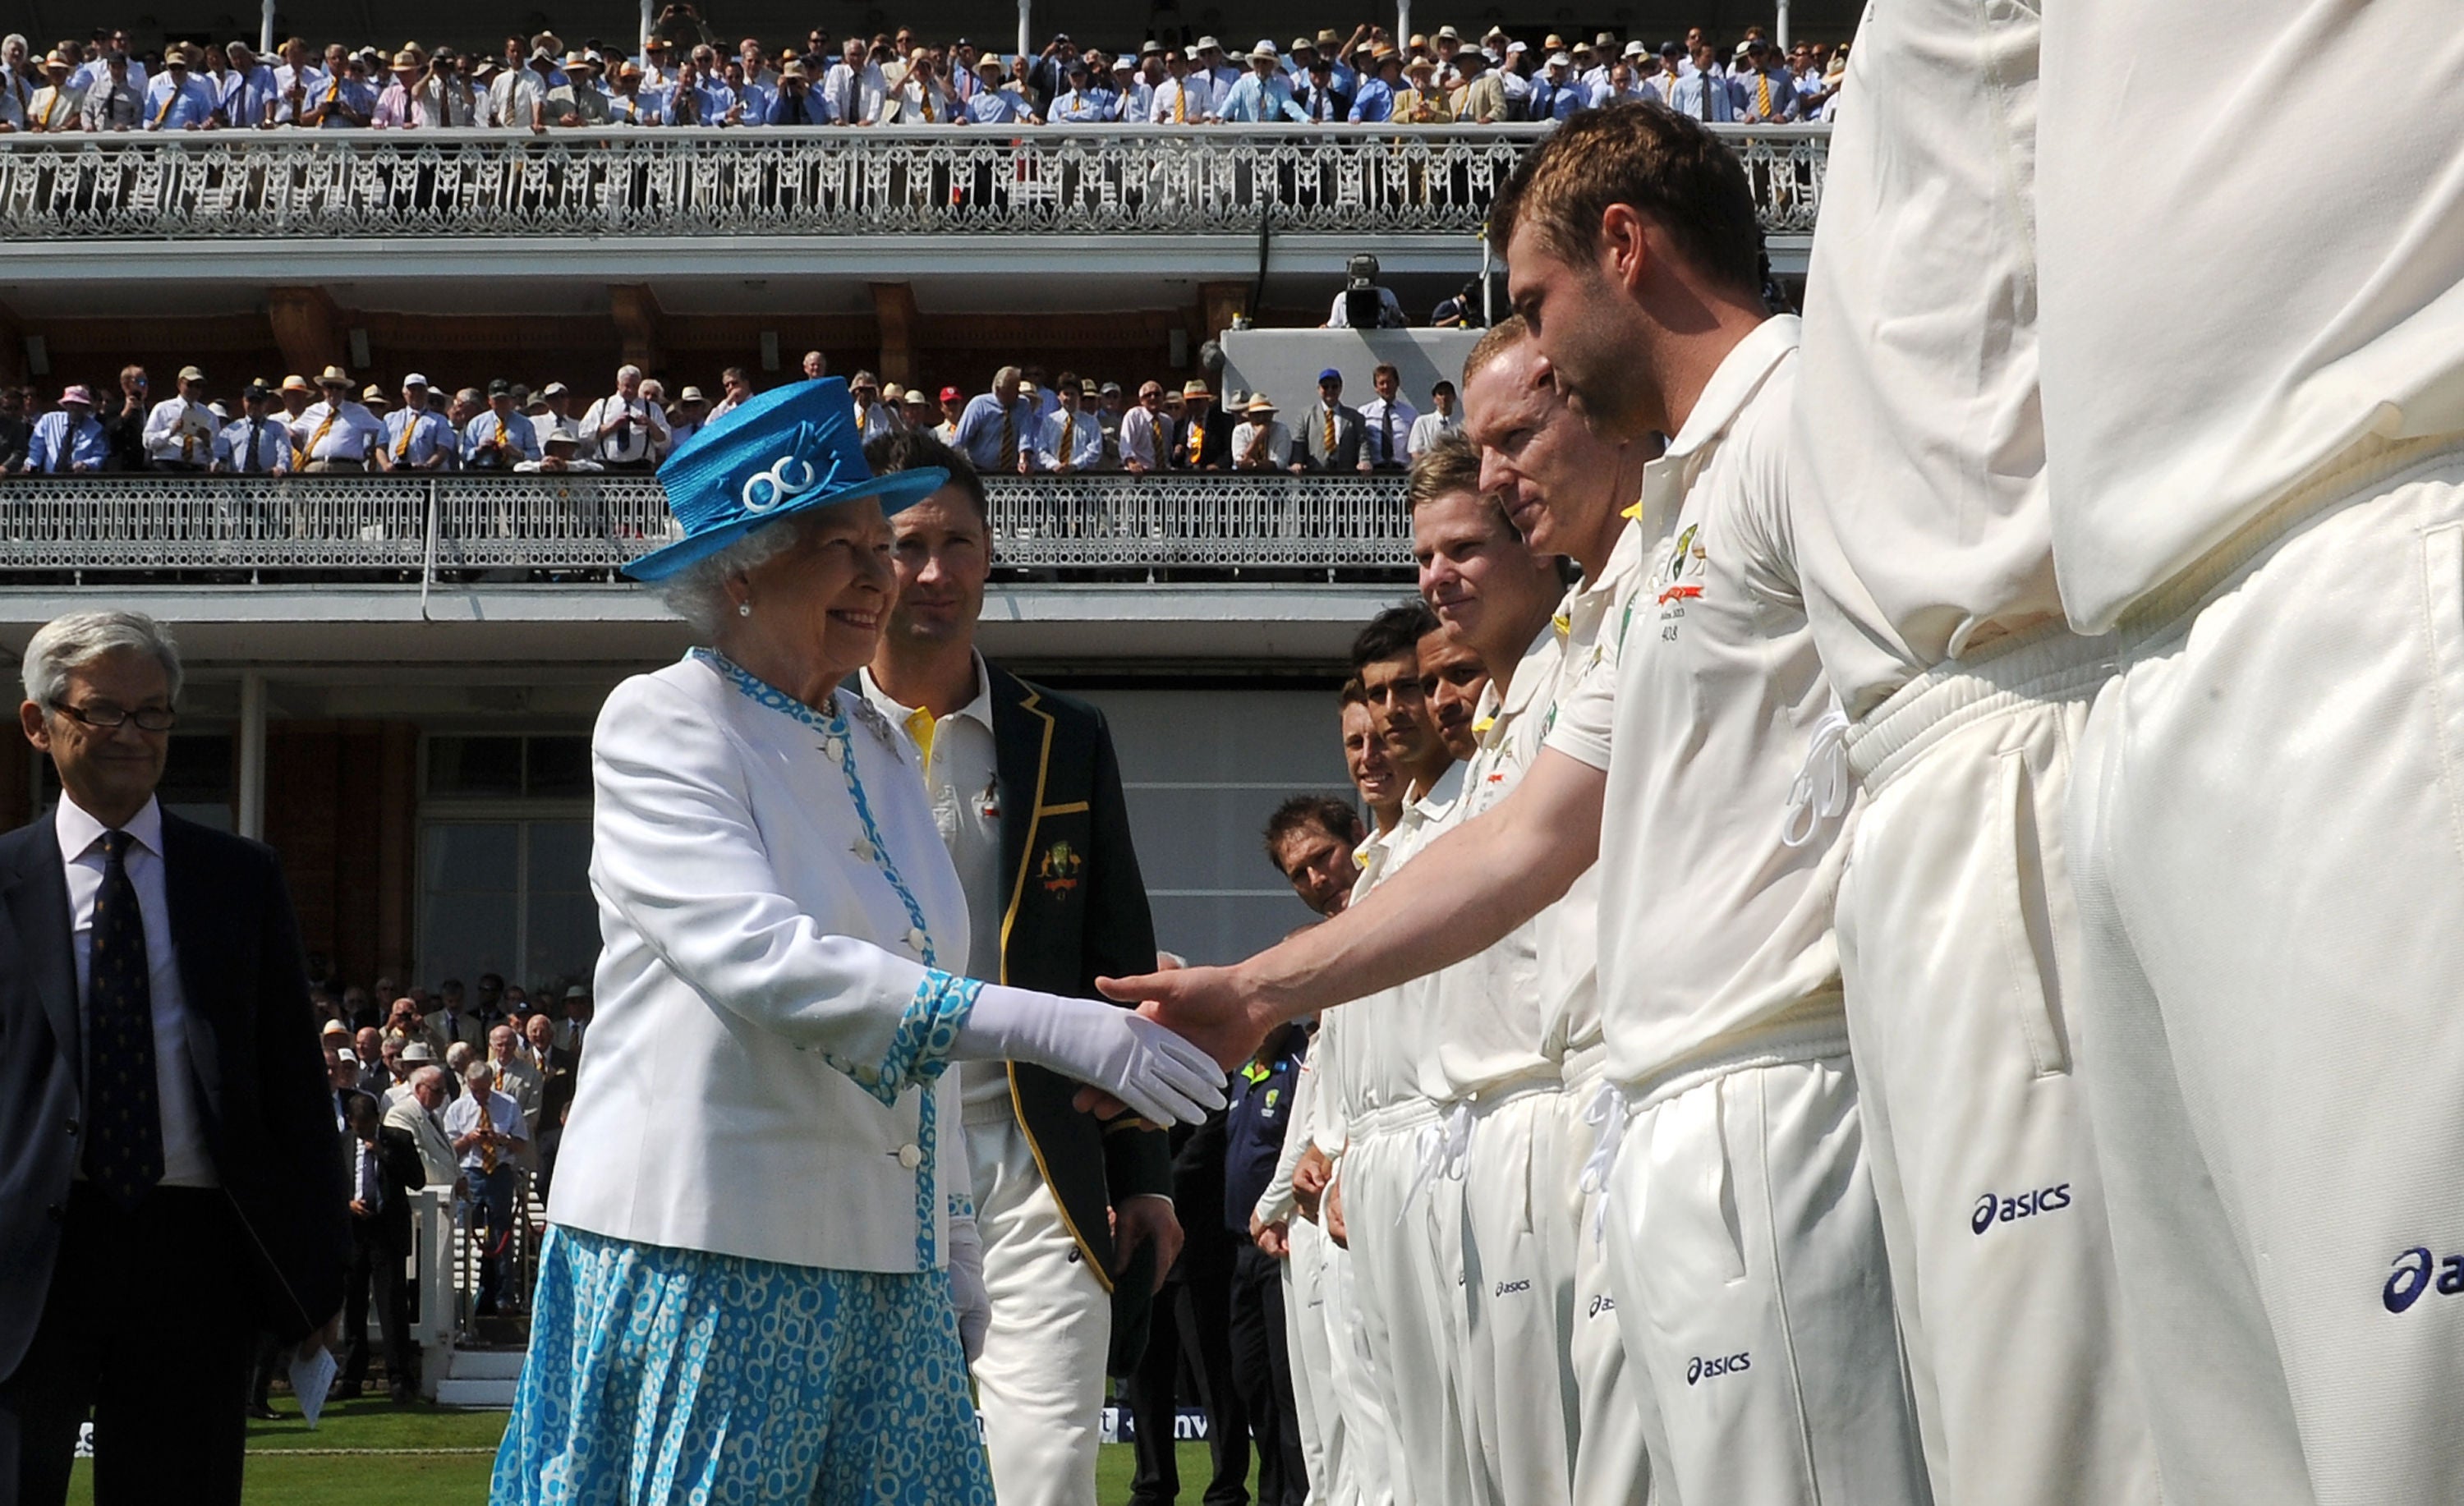 Queen Elizabeth II meet Australian cricketer Phillip Hughes during Ashes Test at Lord’s Cricket Ground, London in 2013 (Anthony Devlin/PA)